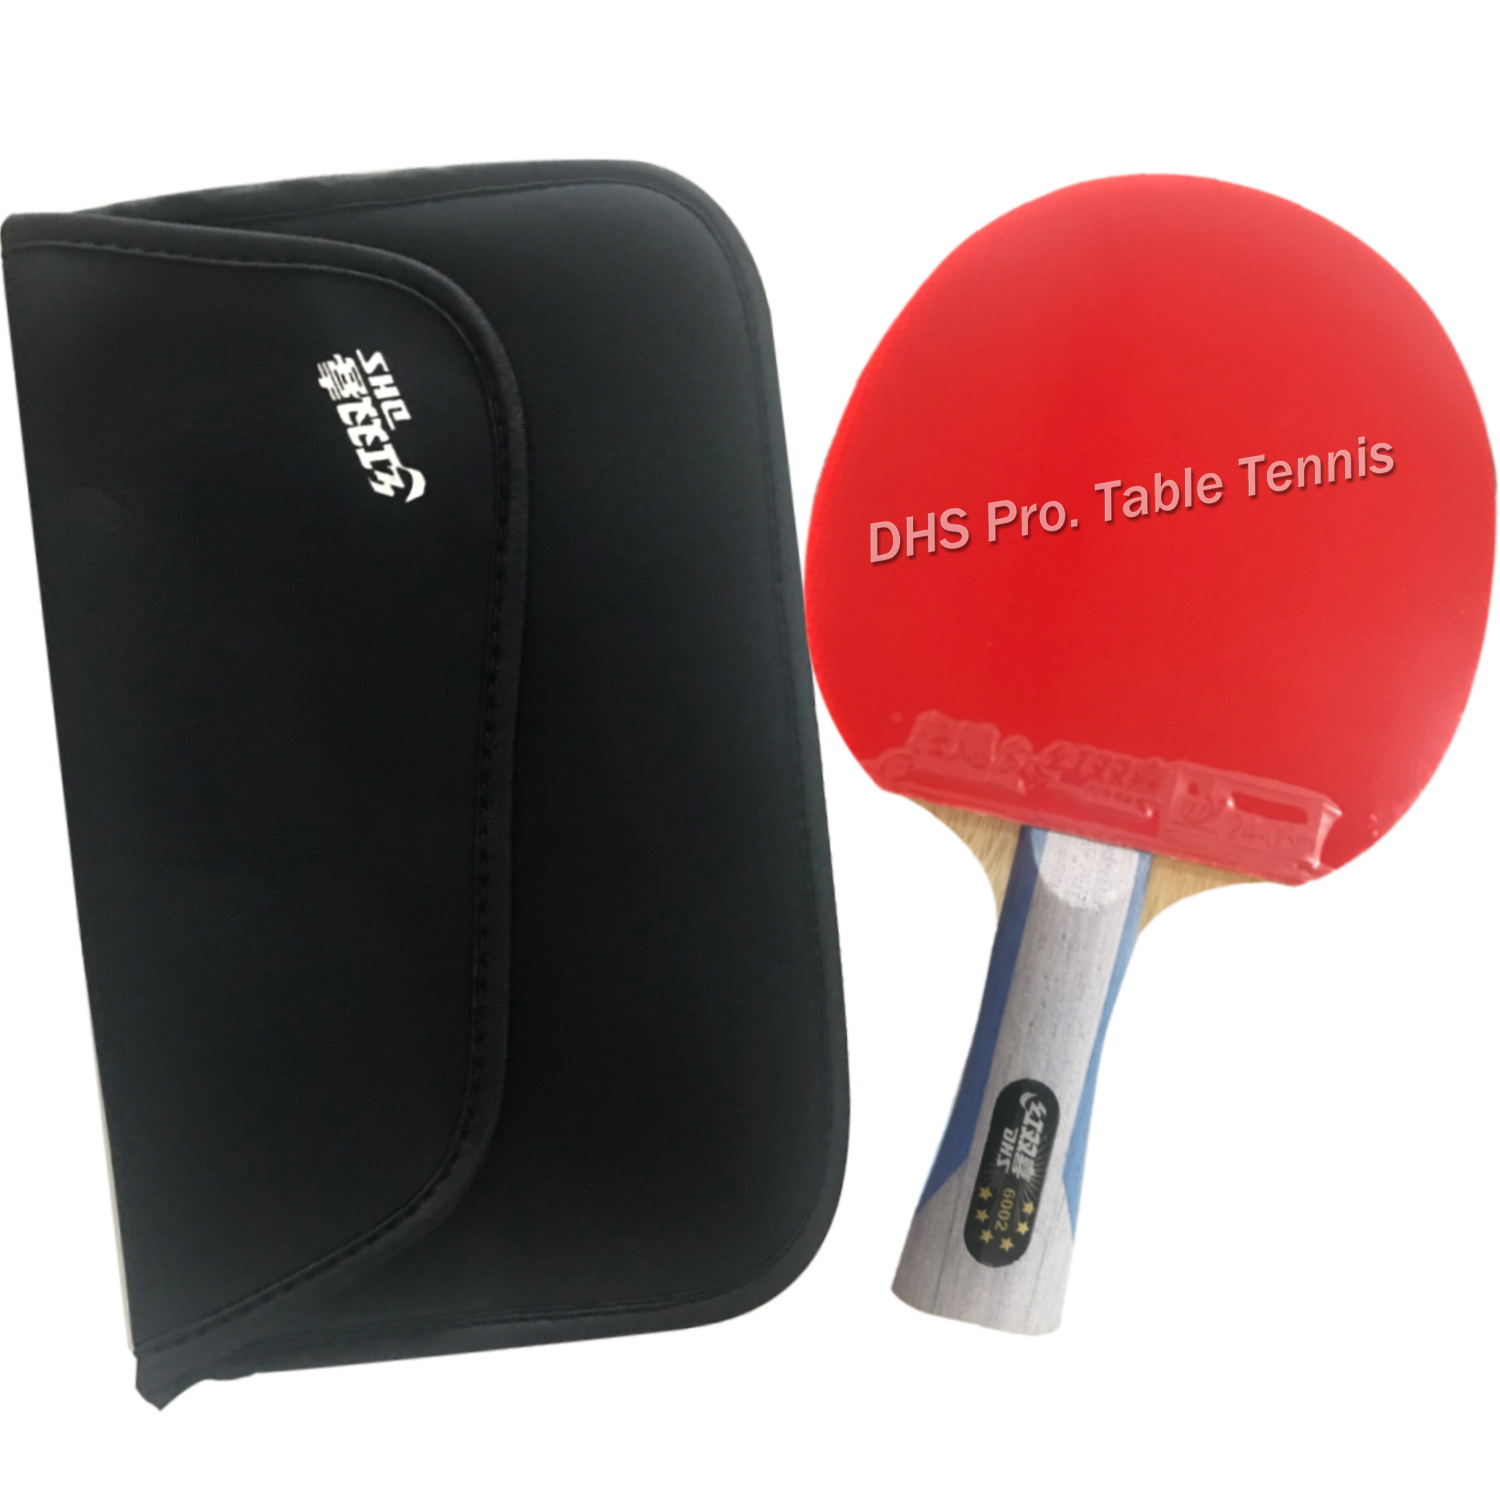 Table Tennis Rackets Shake-hands Grip 5 Star Paddle Bat Long Handle DHS 5002 A 